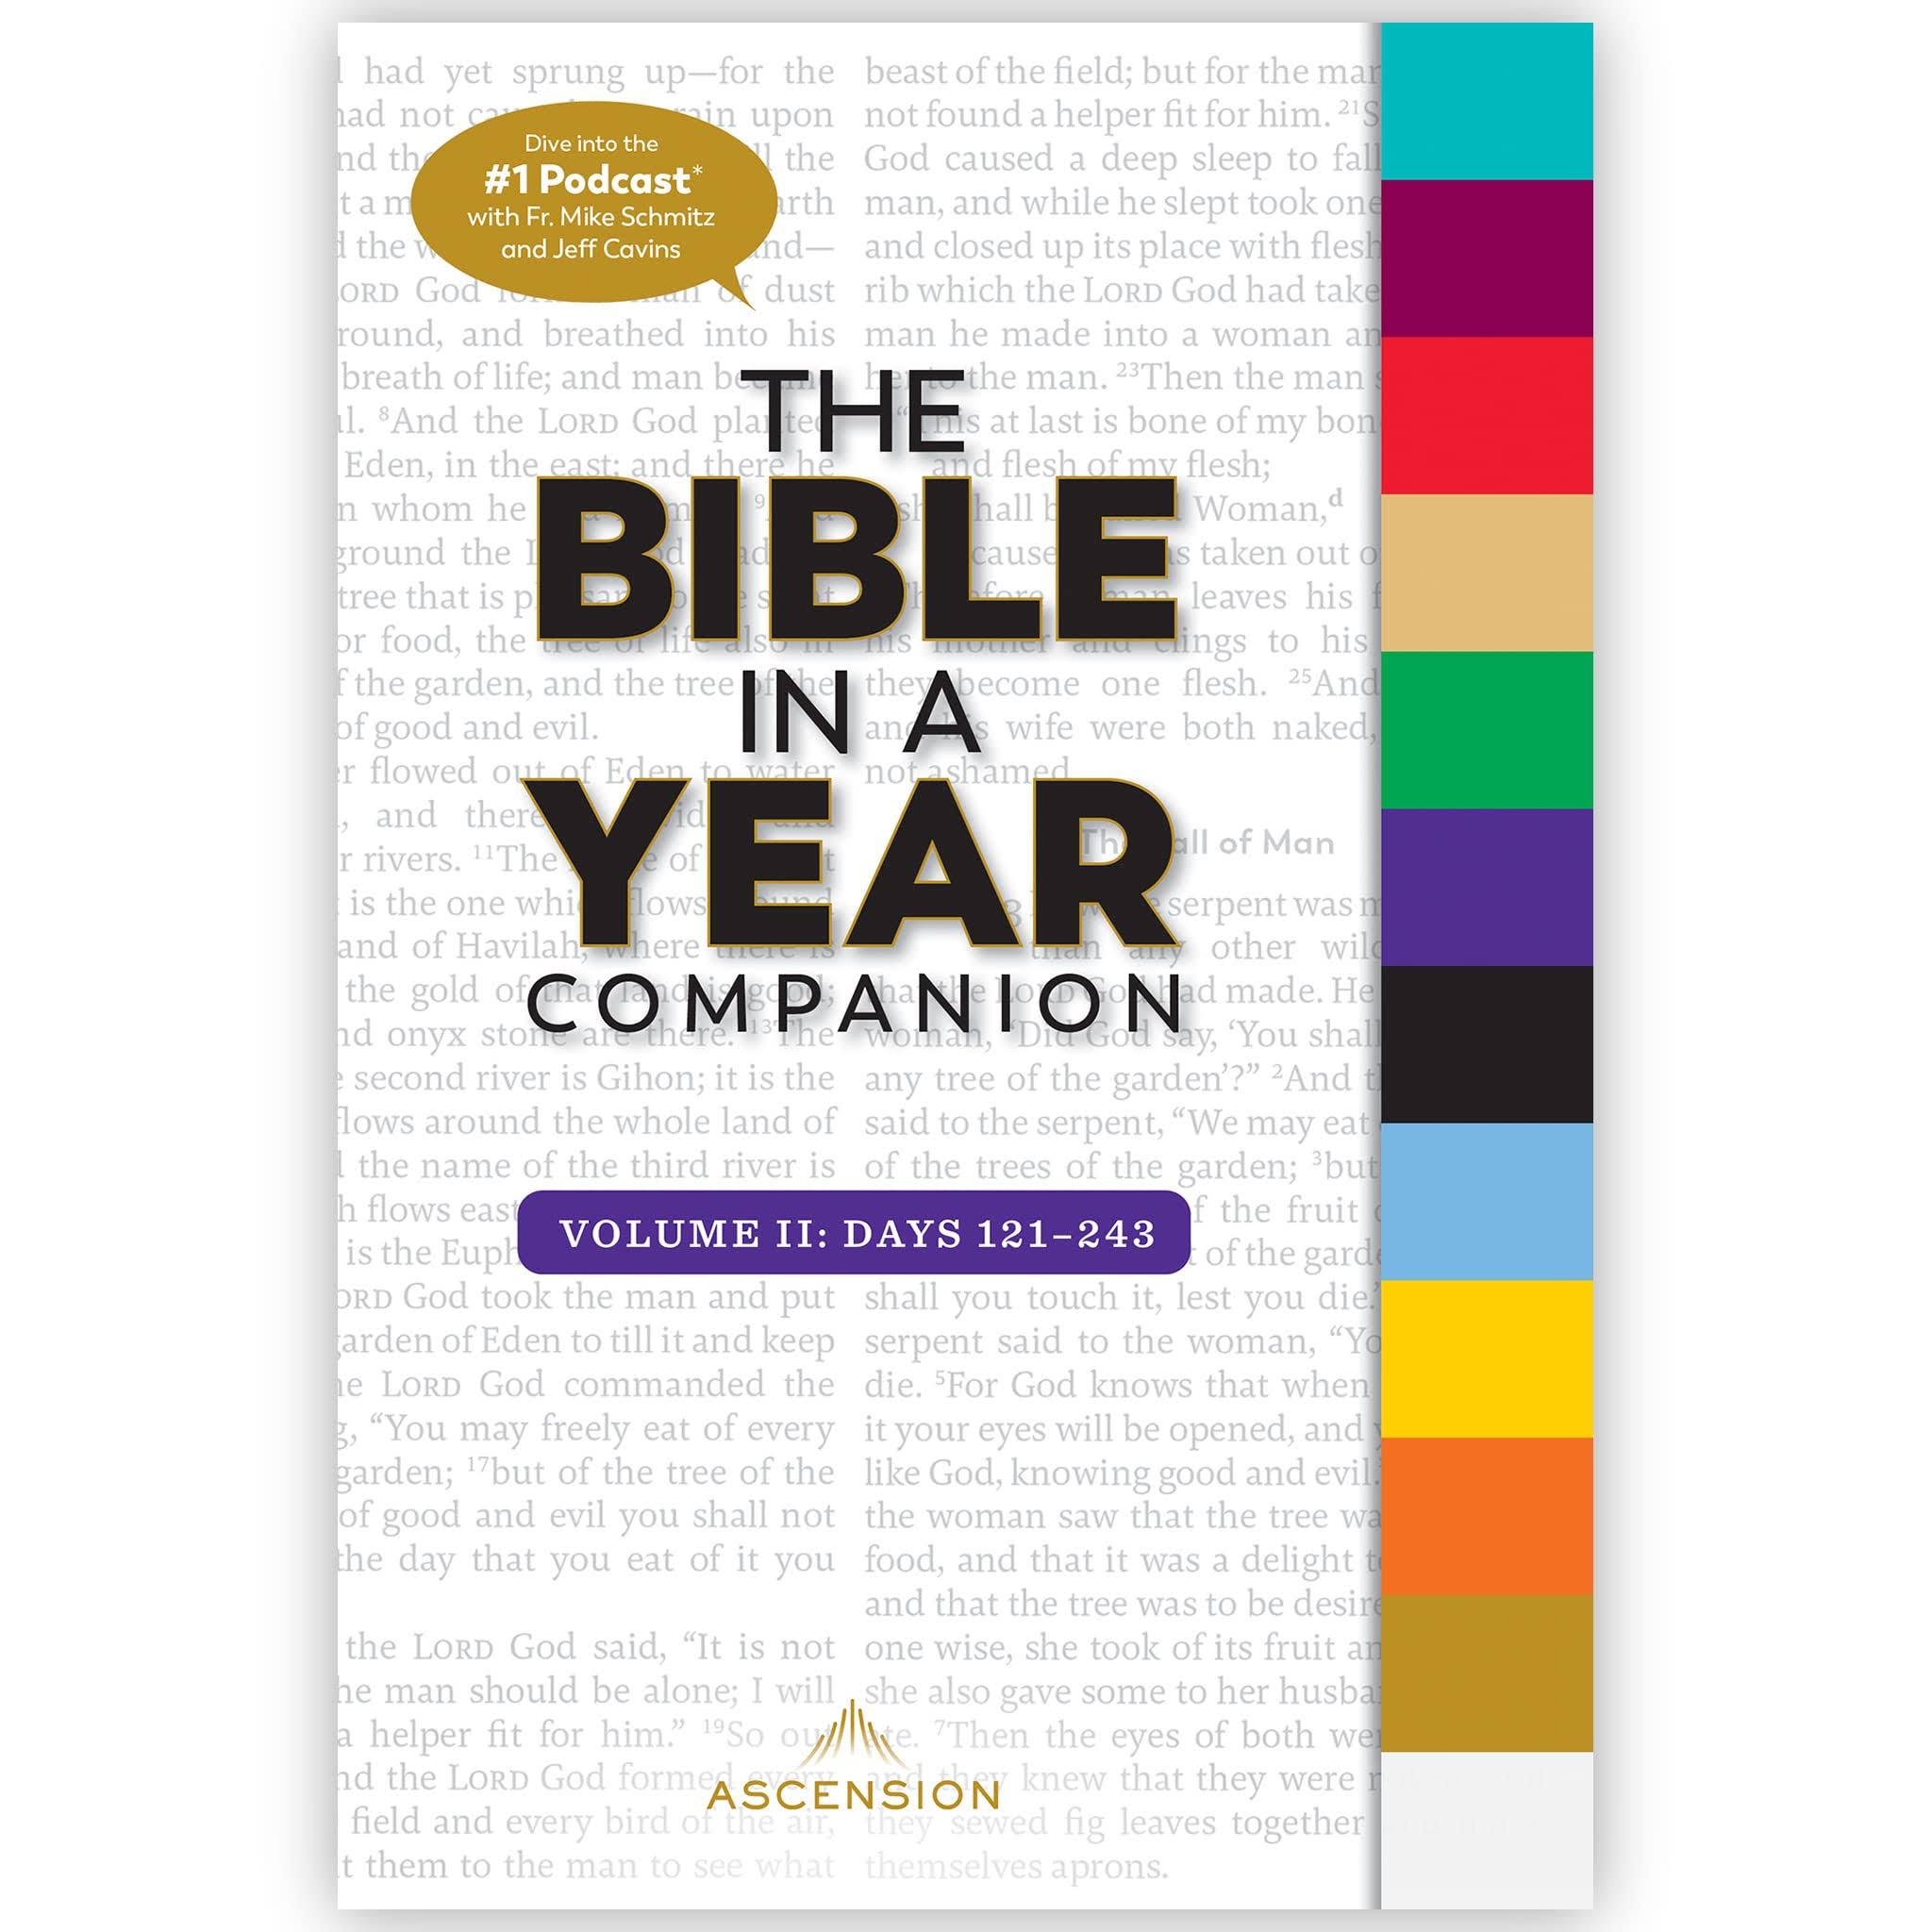 Bible in a Year Companion, Vol 2: Days 121-243 [Book]